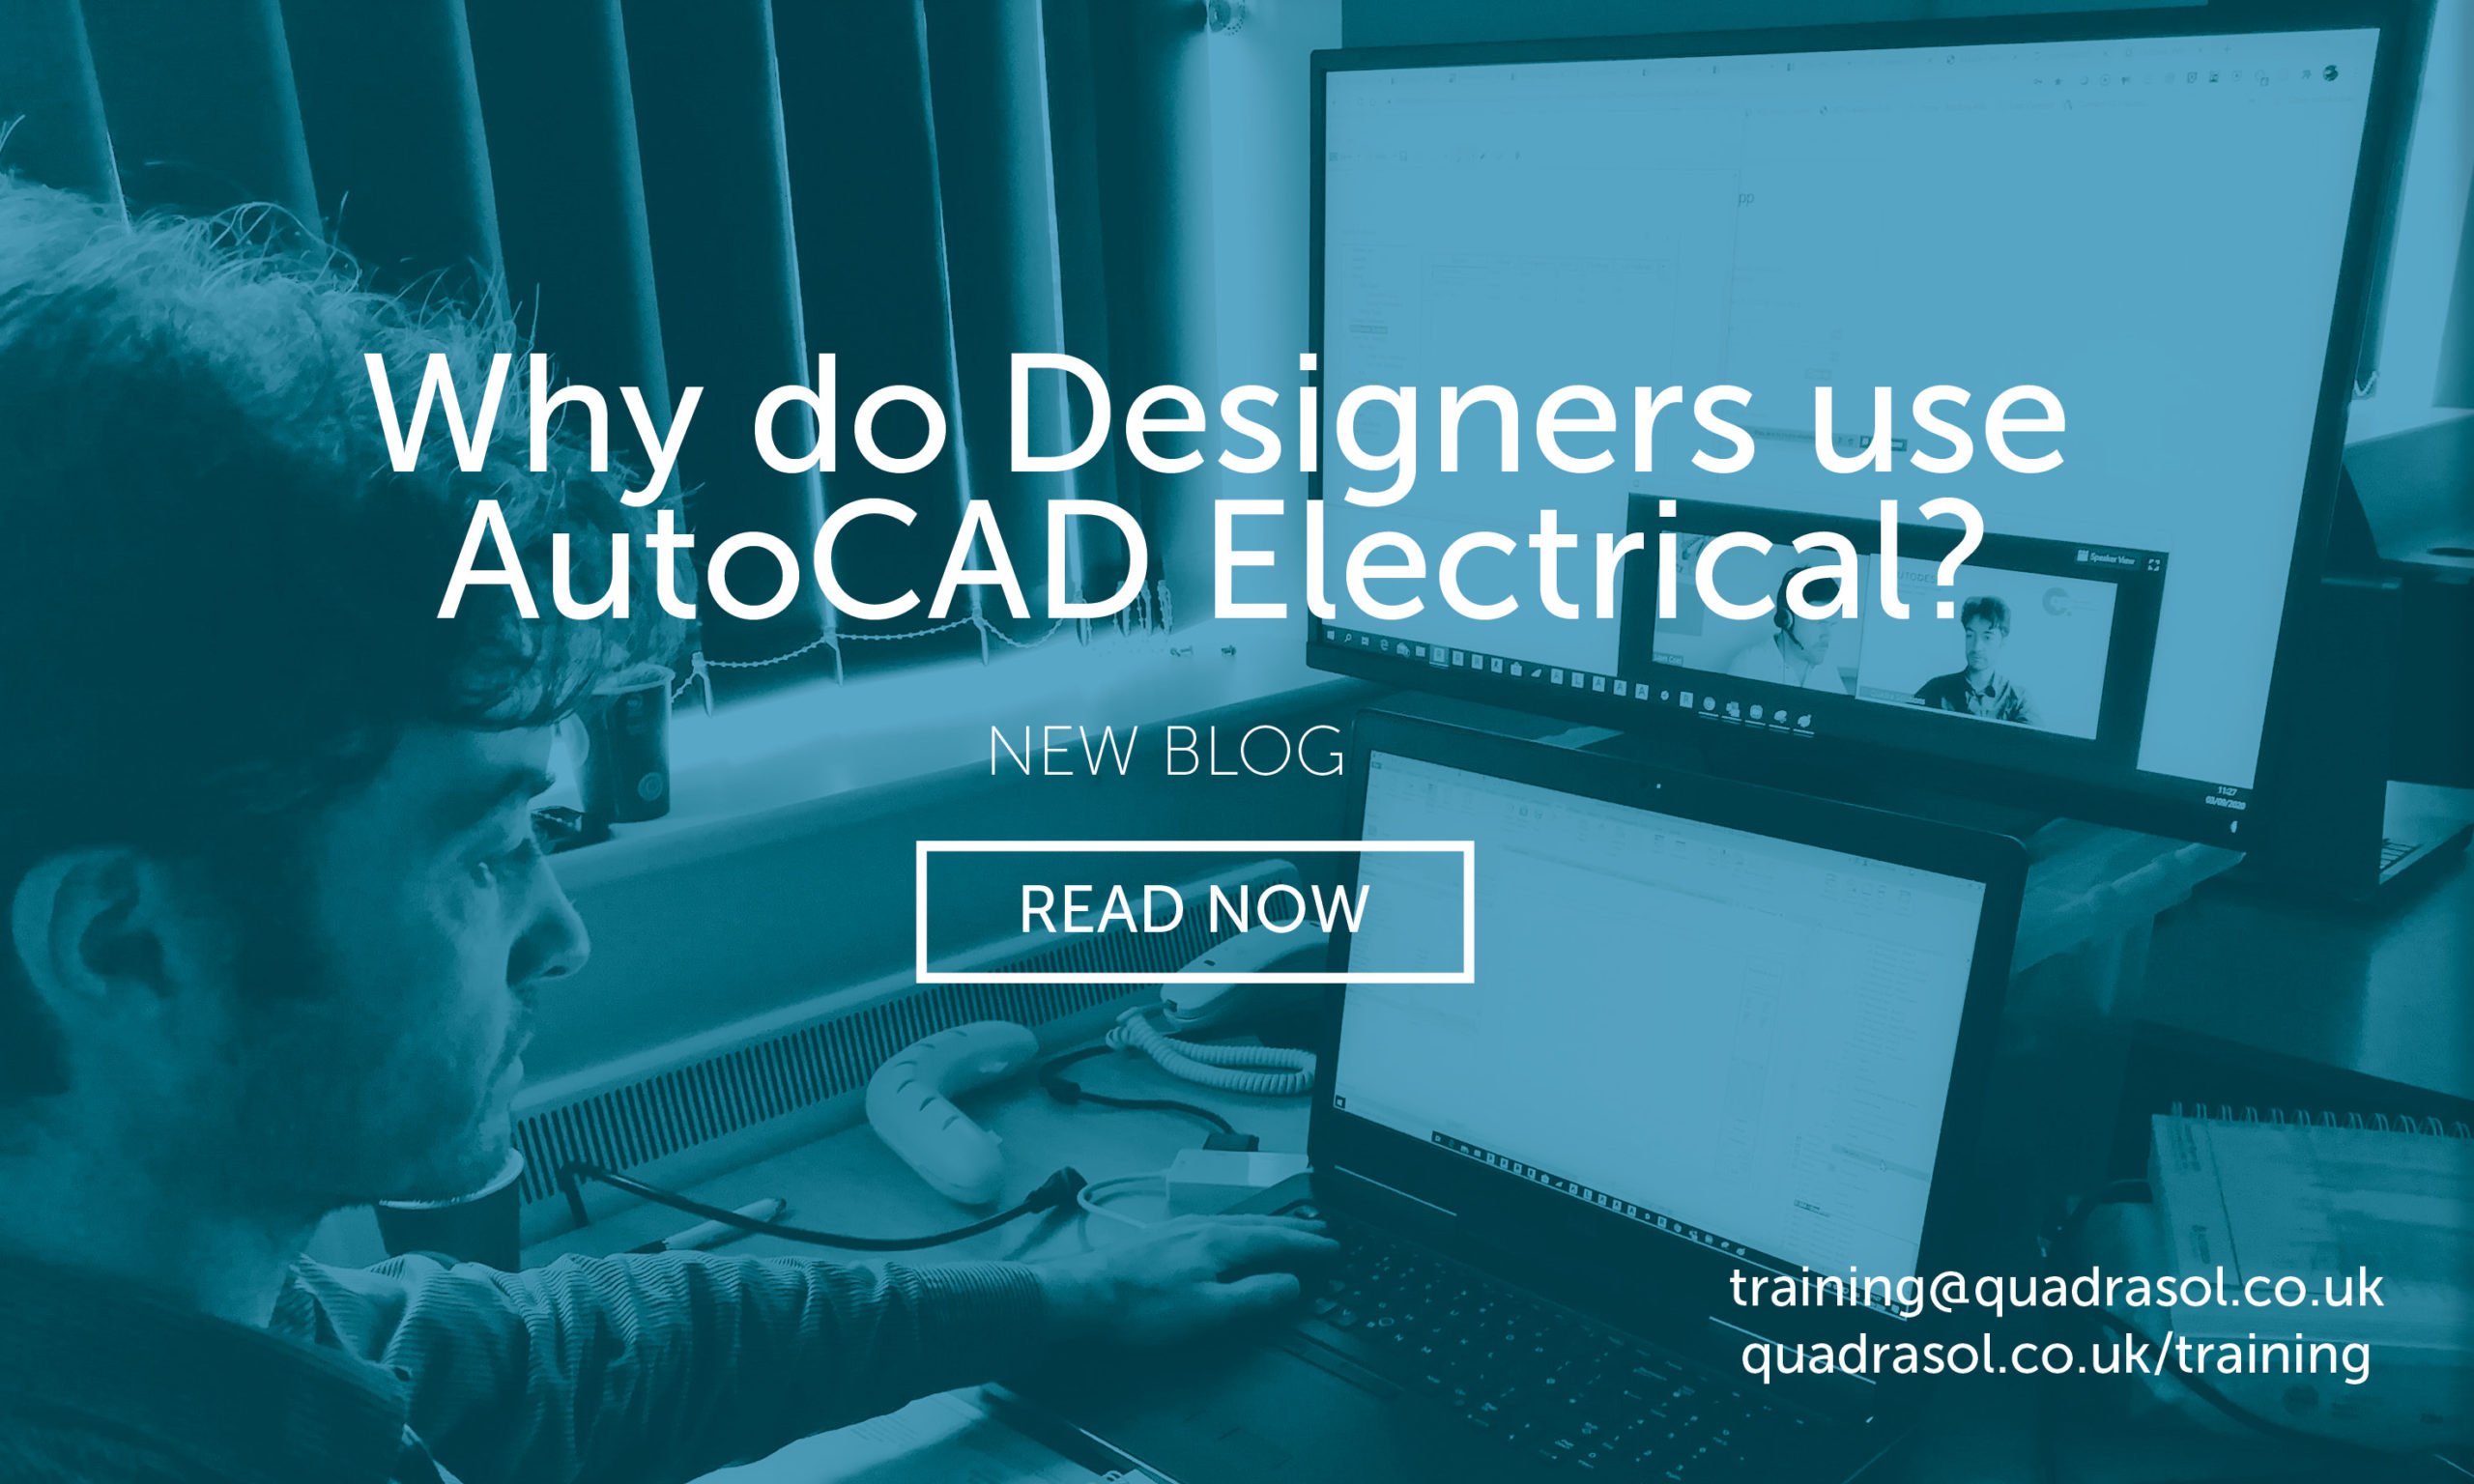 Why do Designers use AutoCAD Electrical?